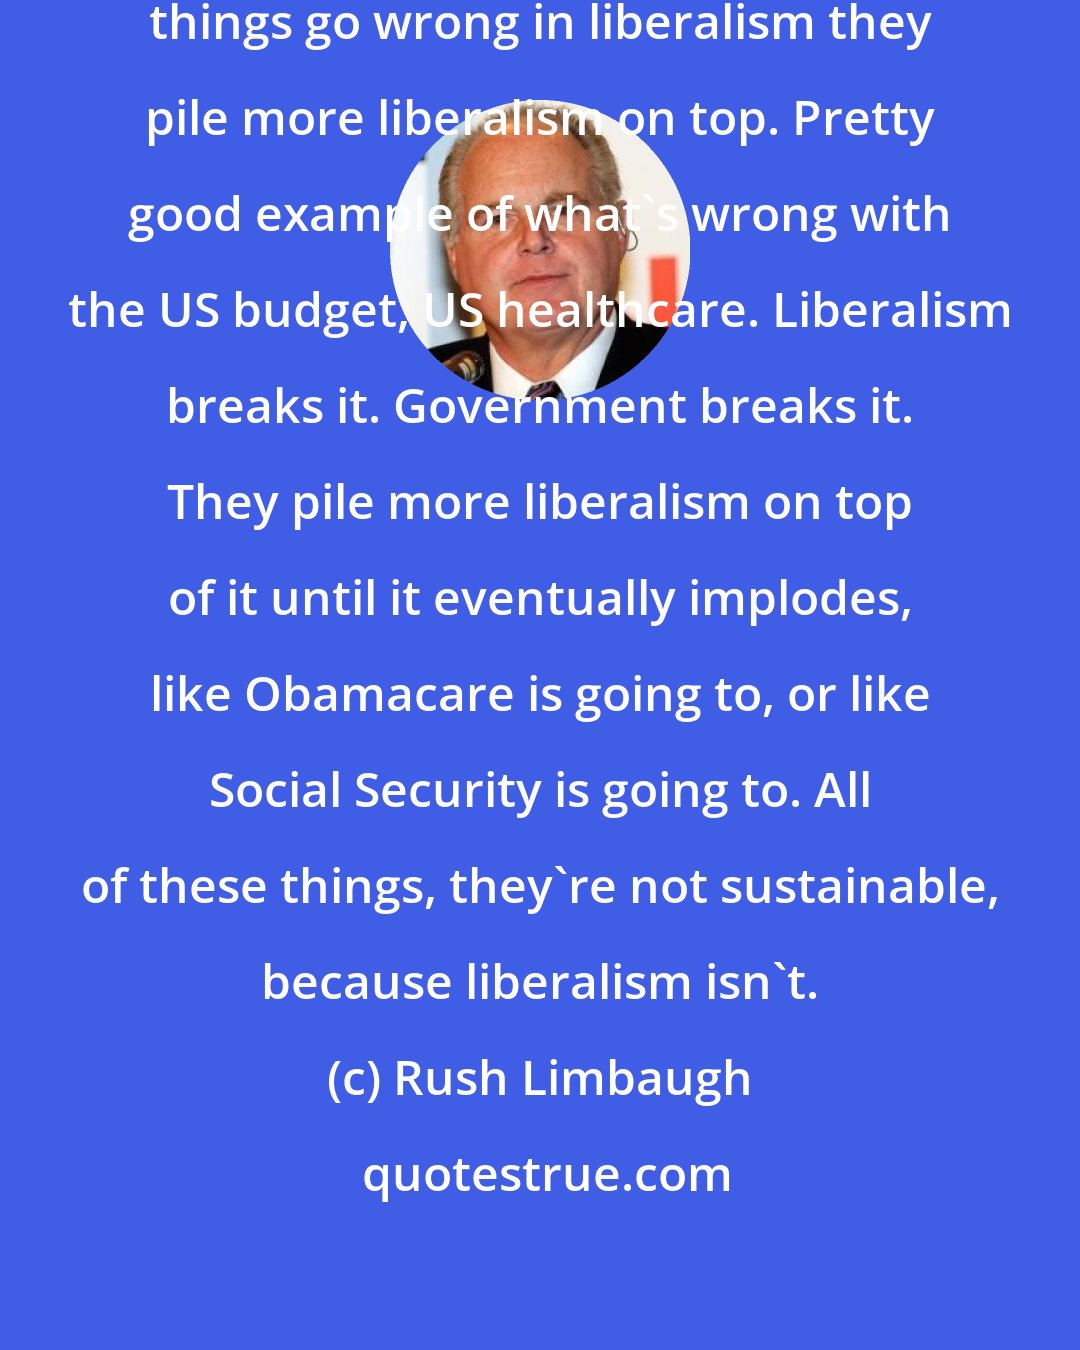 Rush Limbaugh: Liberalism is unsustainable. When things go wrong in liberalism they pile more liberalism on top. Pretty good example of what's wrong with the US budget, US healthcare. Liberalism breaks it. Government breaks it. They pile more liberalism on top of it until it eventually implodes, like Obamacare is going to, or like Social Security is going to. All of these things, they're not sustainable, because liberalism isn't.